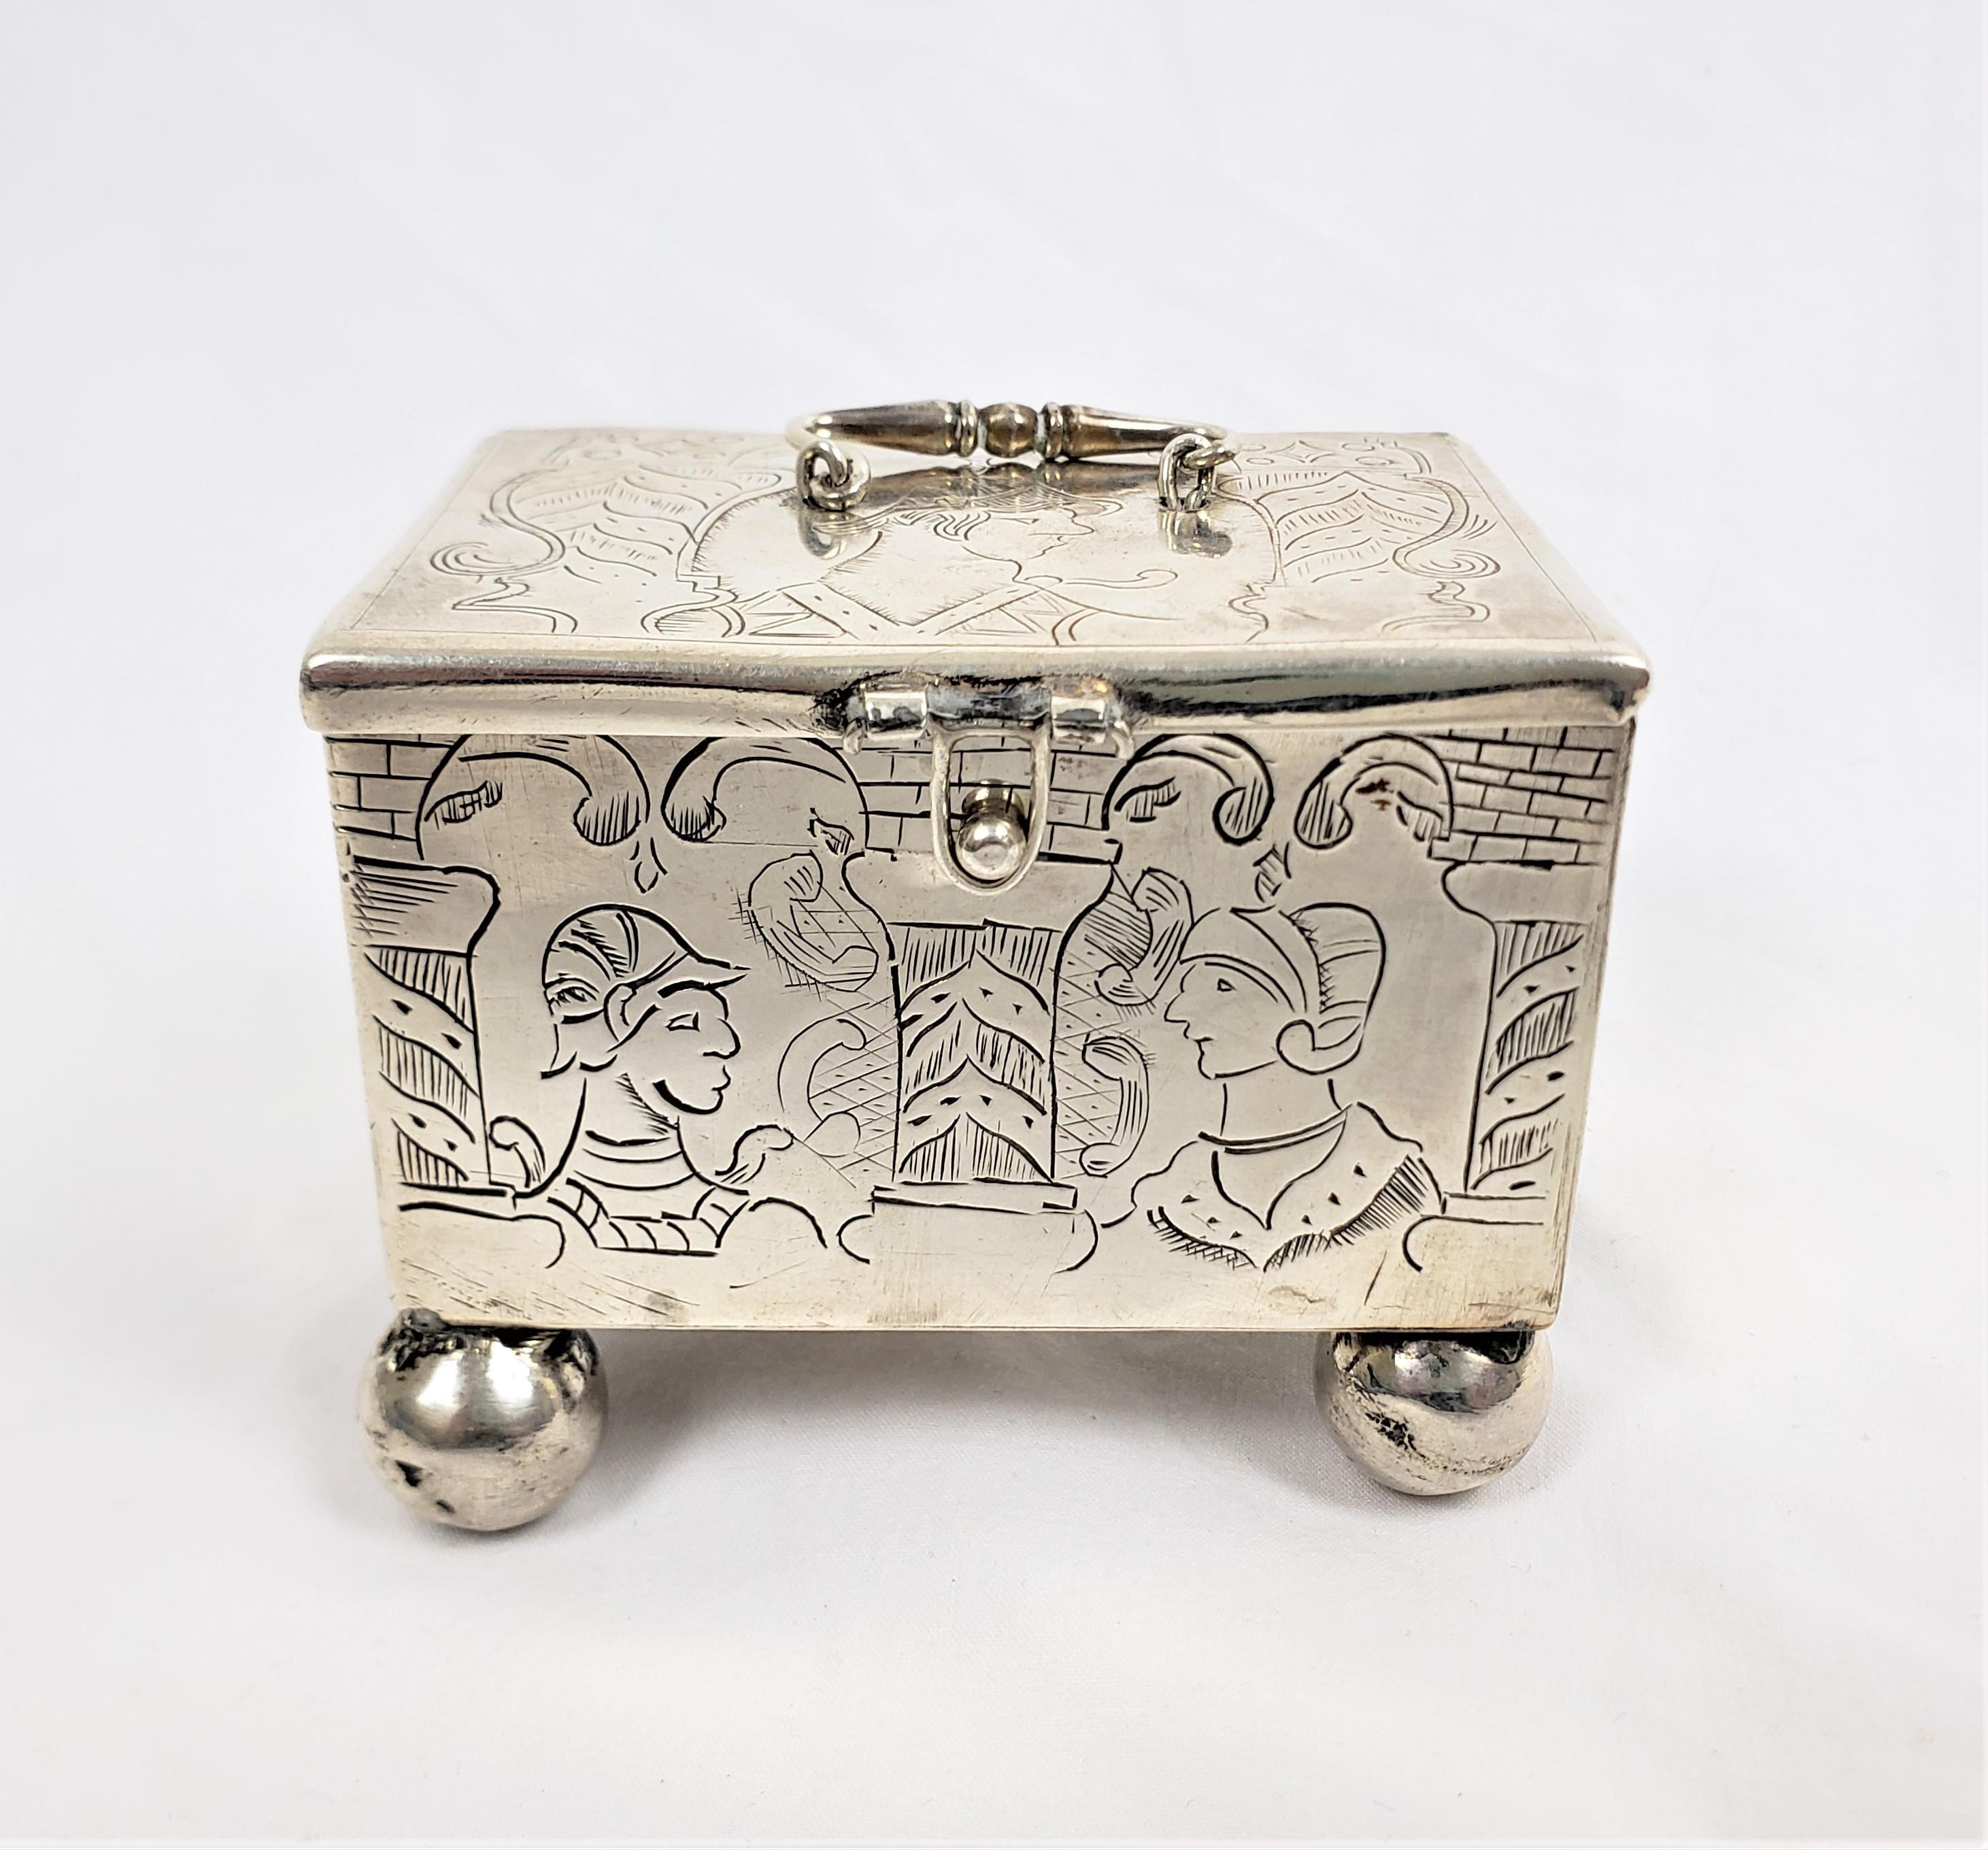 This small box or chest is unsigned, but presumed to have originated from the Netherlands and date to approximately 1710 and done in the period Rococco style. This small marriage chest is composed of sterling silver with an articulated handle and